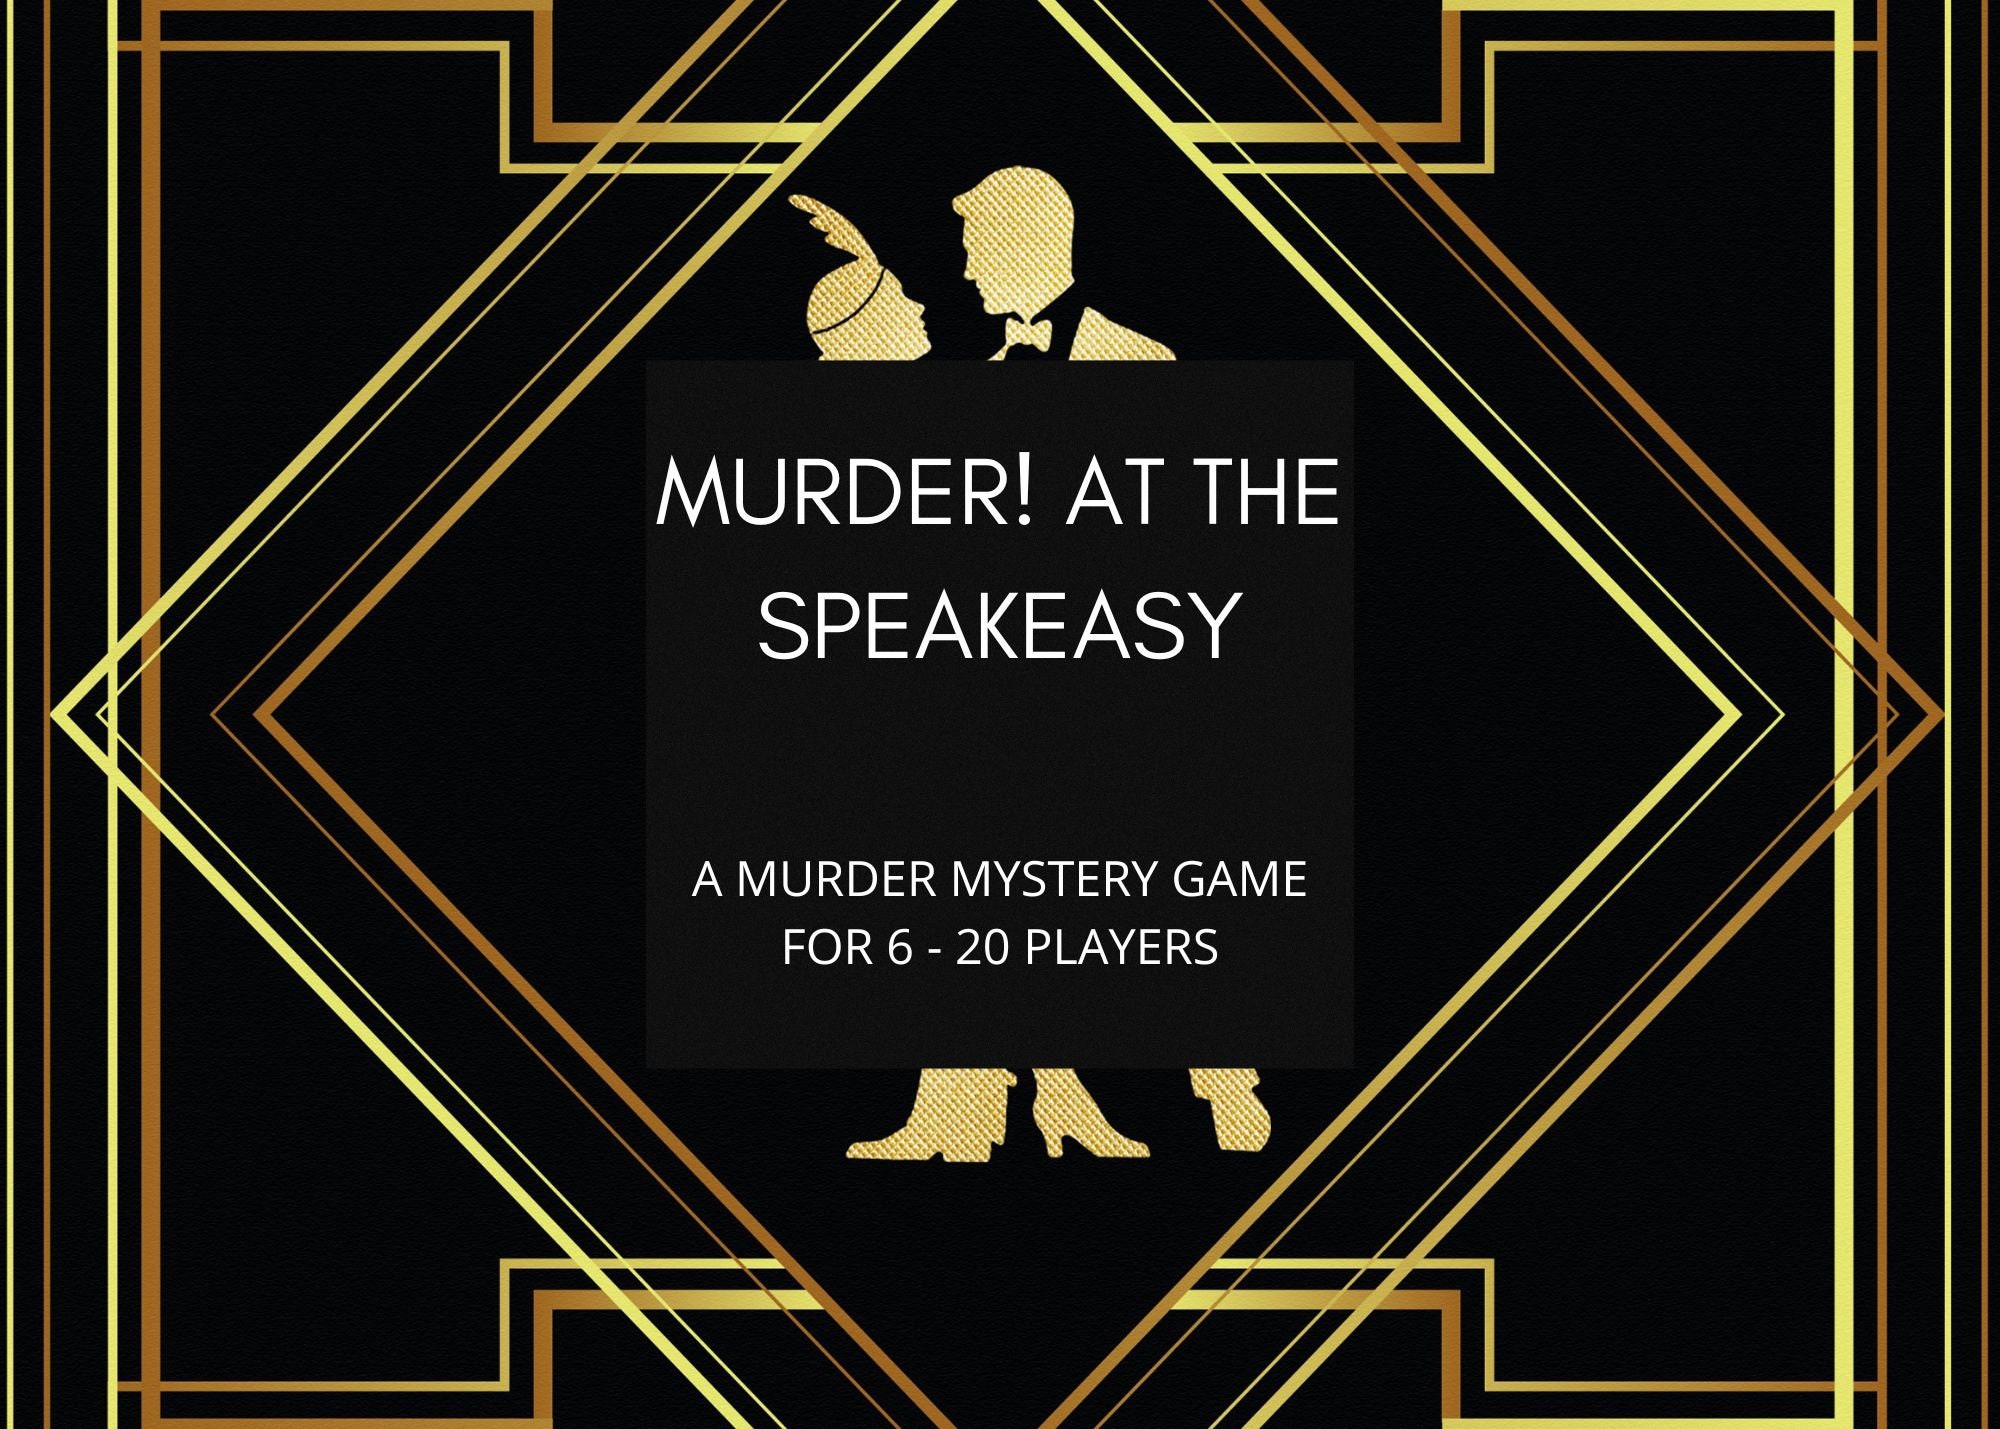 69+ Mystery Story Ideas To Keep Your Audience Guessing Until the End